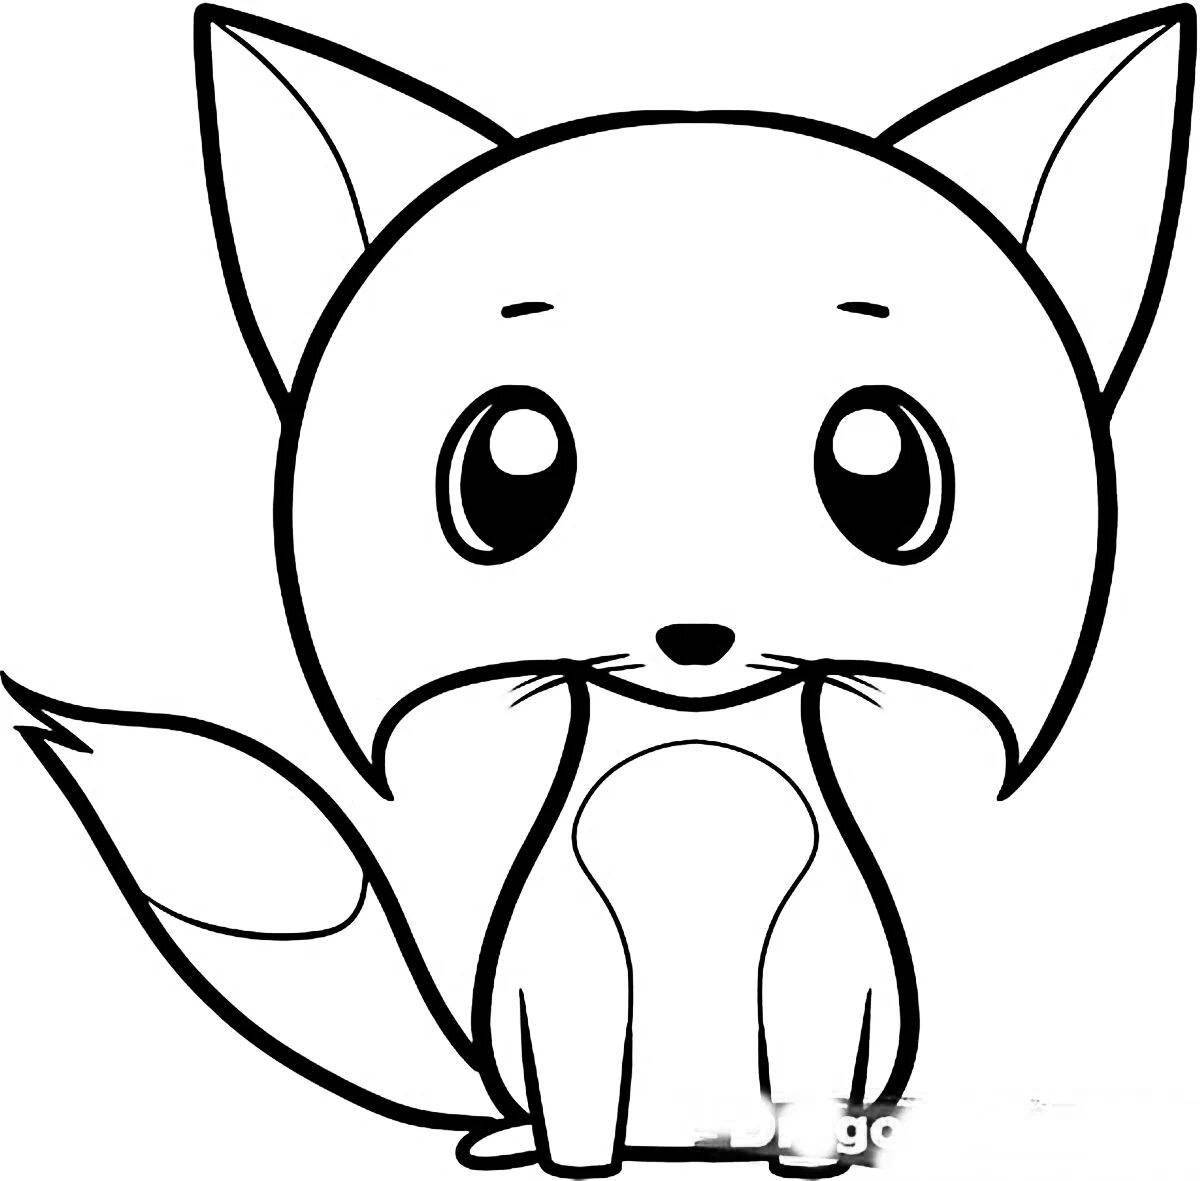 Coloring cute animals for kids